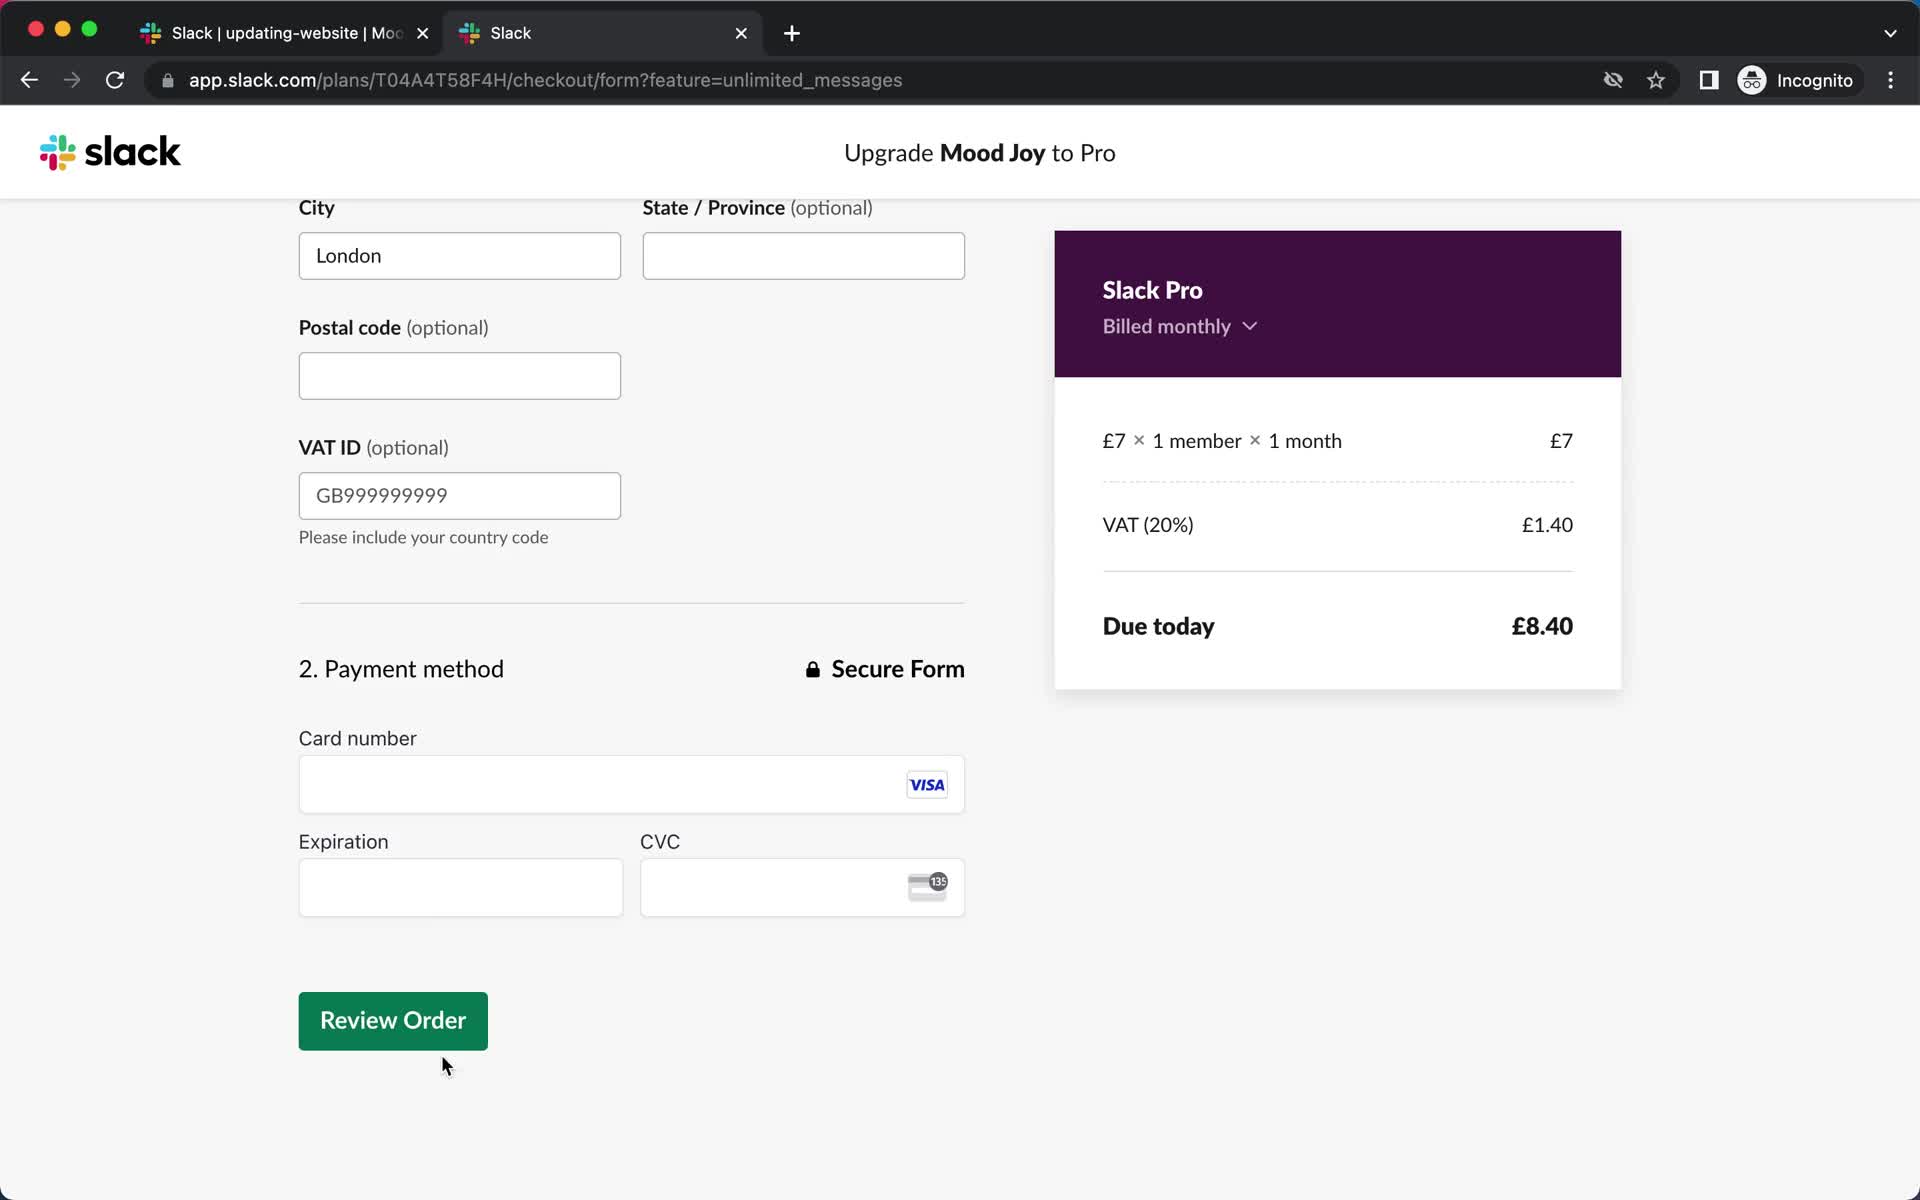 Screenshot of Add payment details on Upgrading your account on Slack user flow